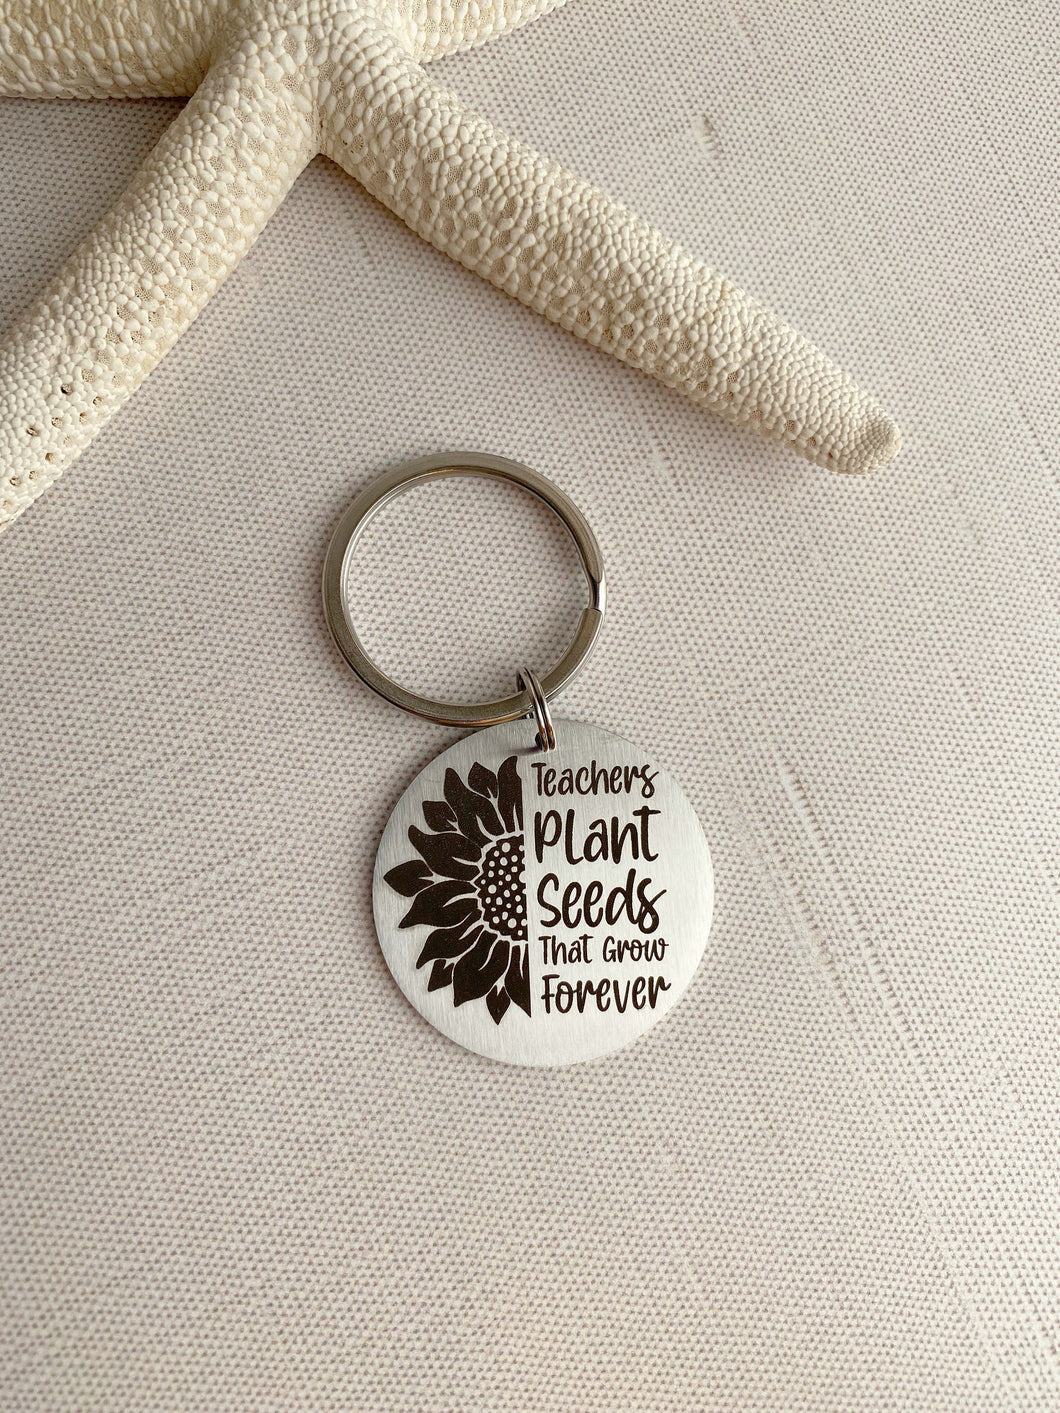 Teacher keychain - stainless steel engraved Key Chain -  sunflower keychain - teachers plant seeds that grow forever quote keychain